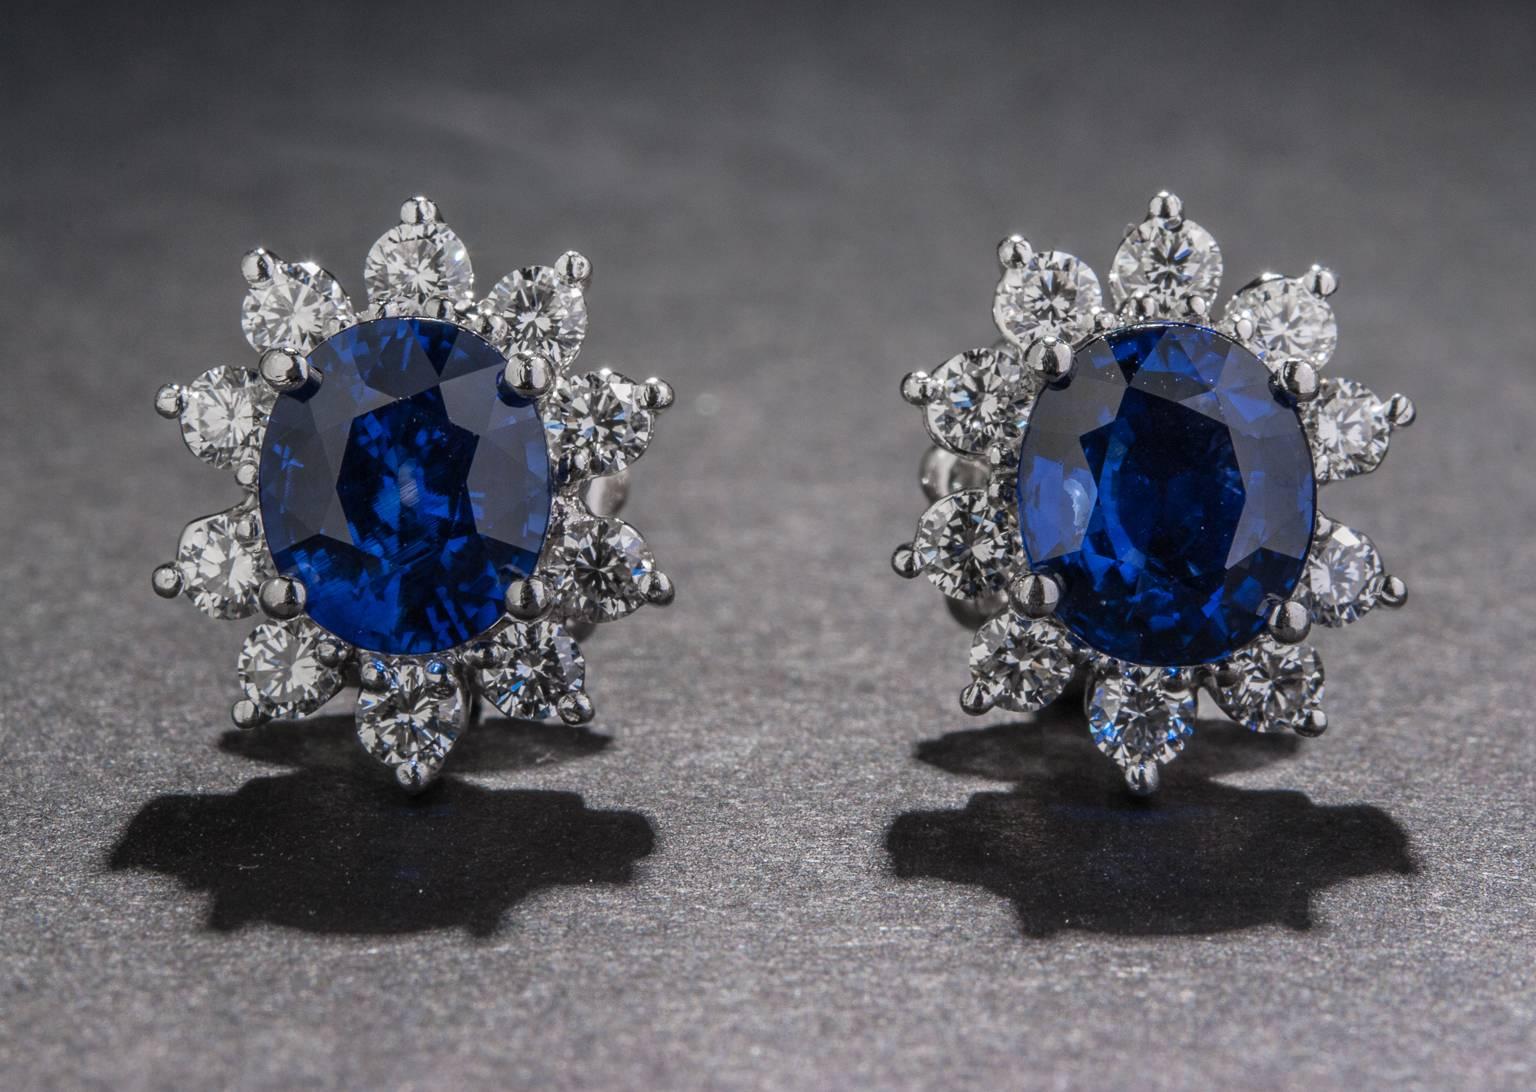 An absolutely beautiful pair of sapphire and diamond earrings. The two oval cut medium blue sapphires weigh a combined total of 4.10 carats and they are flanked by 1.10 total carats of bright accent diamonds which surround each sapphire like the